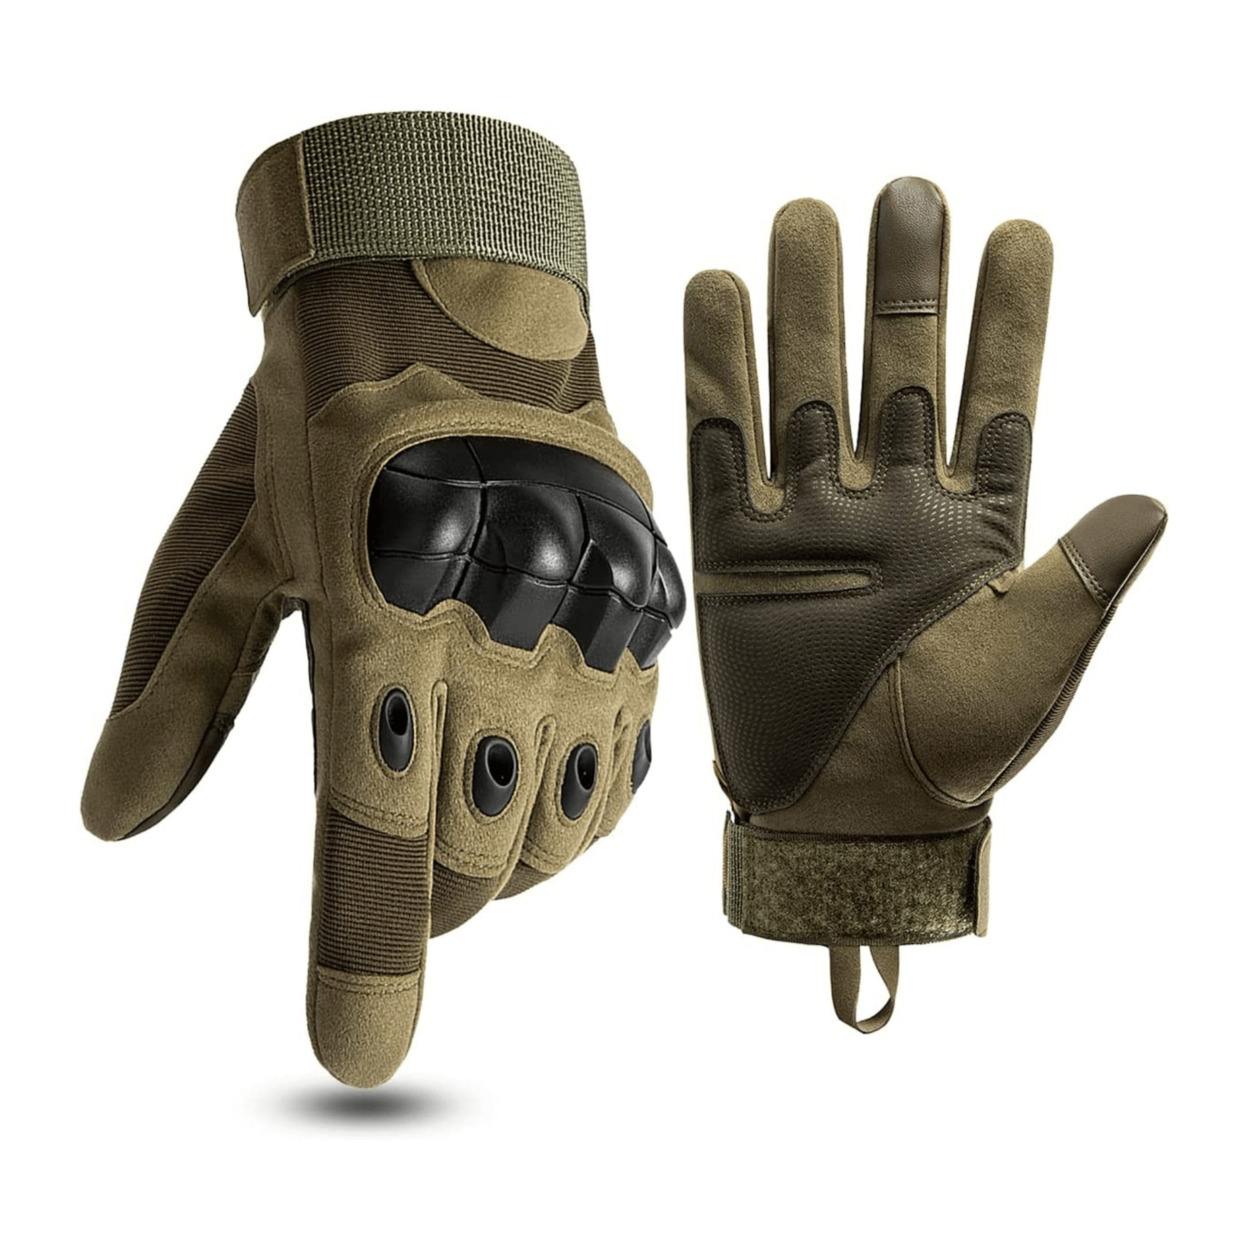 Tactical Military Airsoft Gloves For Outdoor Sports, Paintball, And Motorcycling With Touchscreen Fingertip Capability - Green, Large